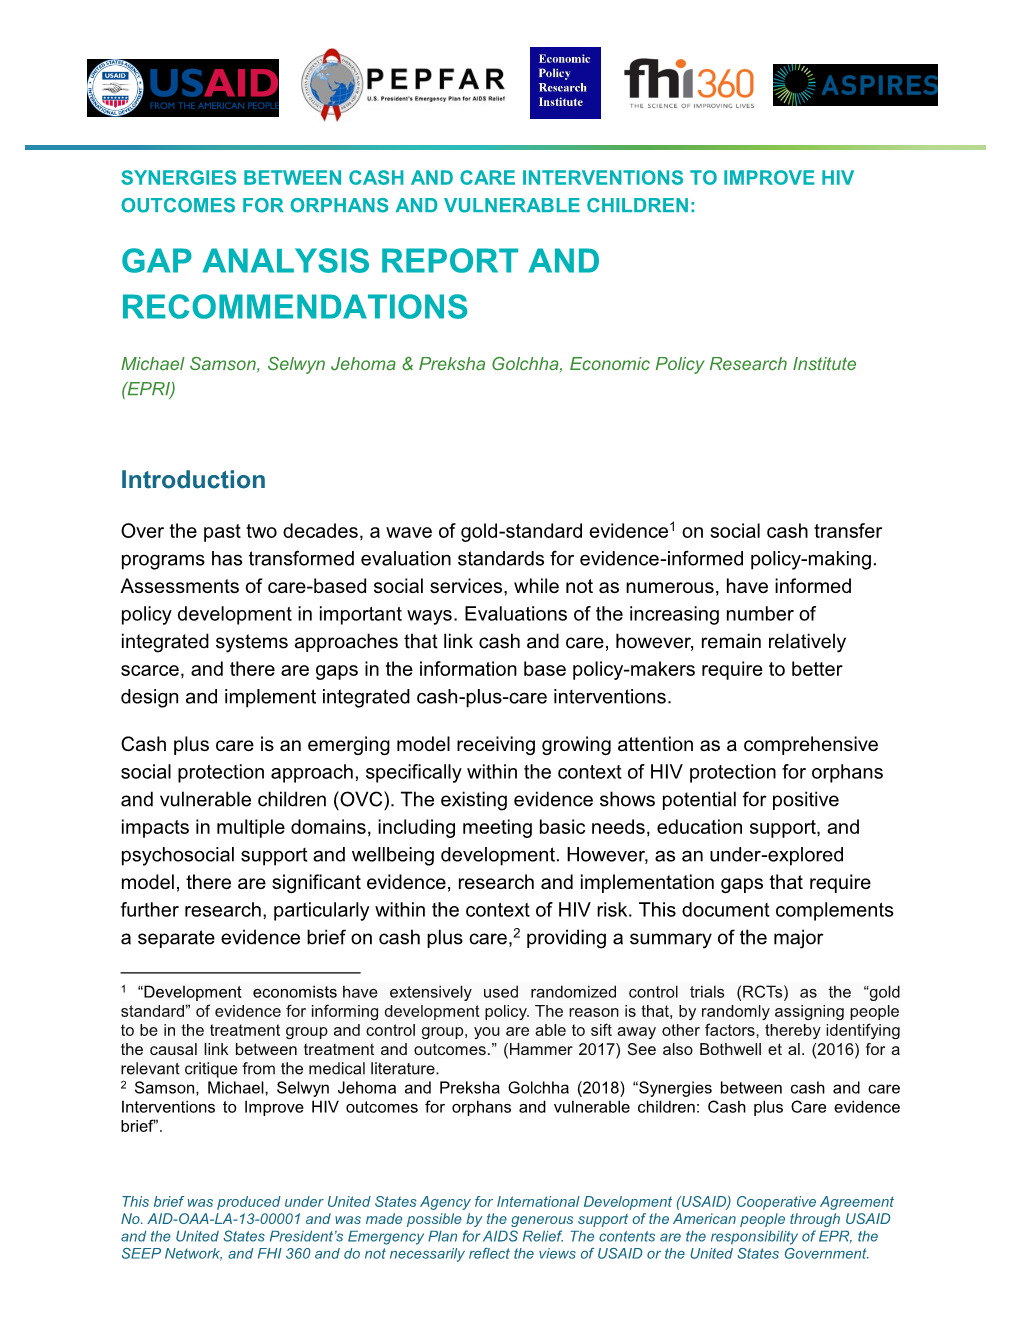 Gap Analysis Report and Recommendations